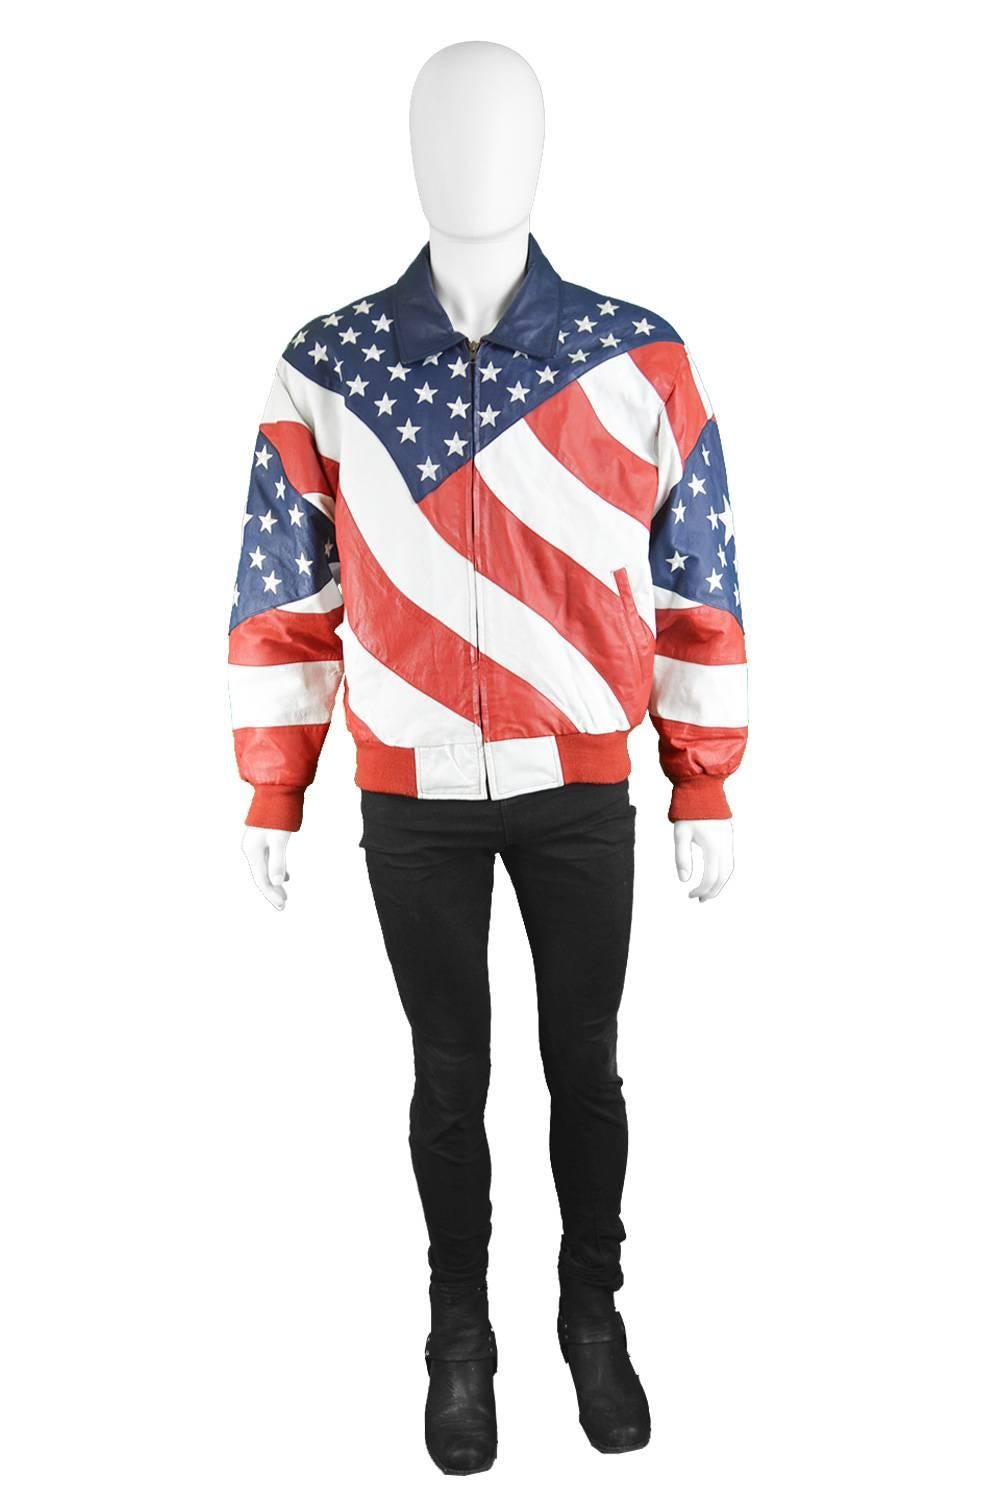 Michael Hoban Vintage 1980's Men's Stars & Stripes Embroidered Leather Jacket

Size: Marked M
Chest - 48” / 122cm (has a loose, slouchy fit around chest like most bomber jackets)
Waist - 36” / 91cm
Length (Shoulder to Hem) - 24” / 61cm
Shoulder to